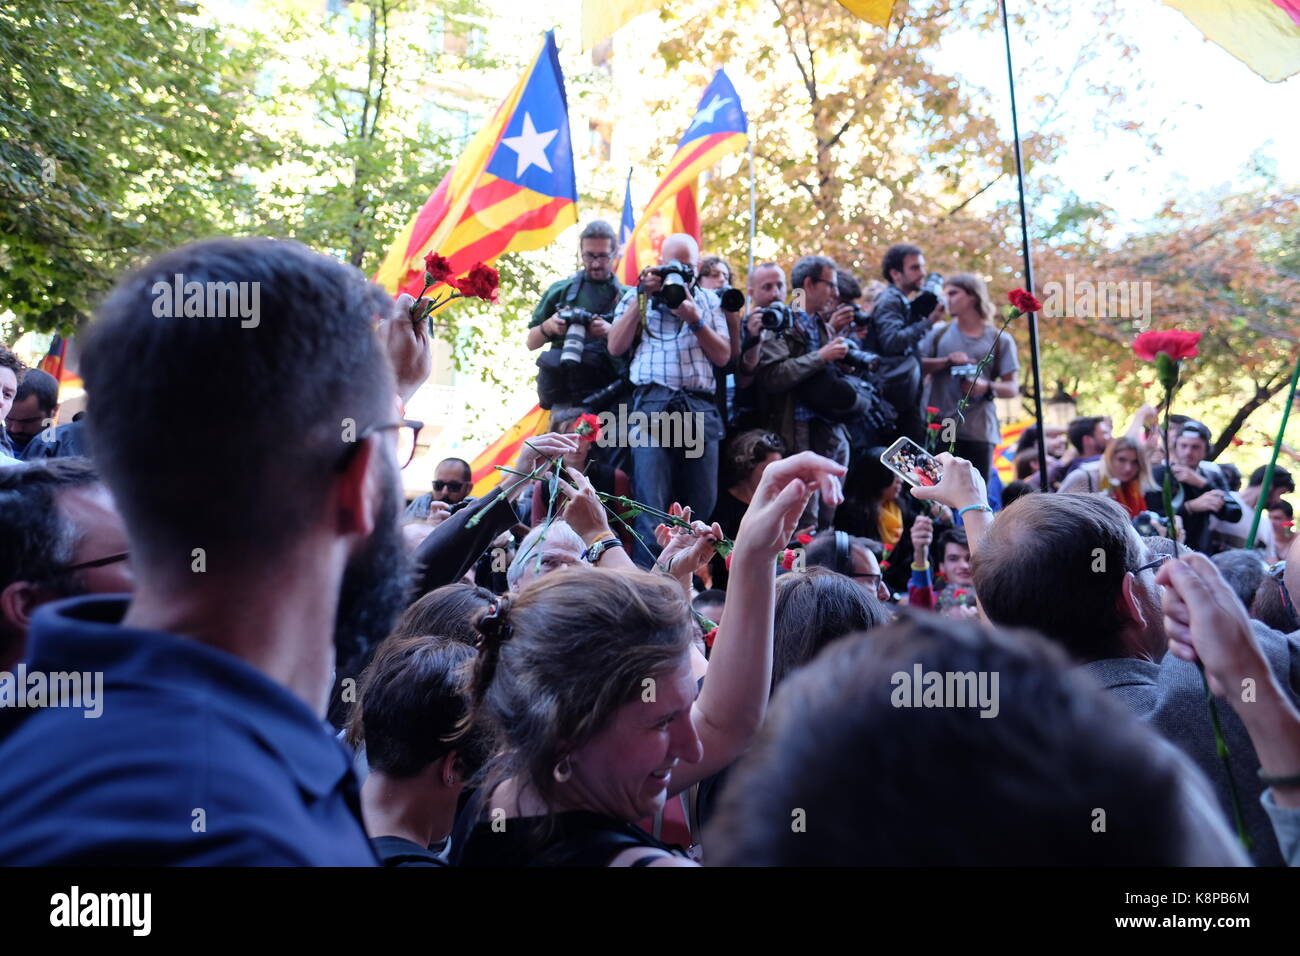 Barcelona, Spain. 20th Sep, 2017. People go to the streets to demonstrate against Spanish government decision of arresting high politicians. Thousands of people are waving independentist flags and symbols of democracy. Credit: Victor Turek/Alamy Live News Stock Photo